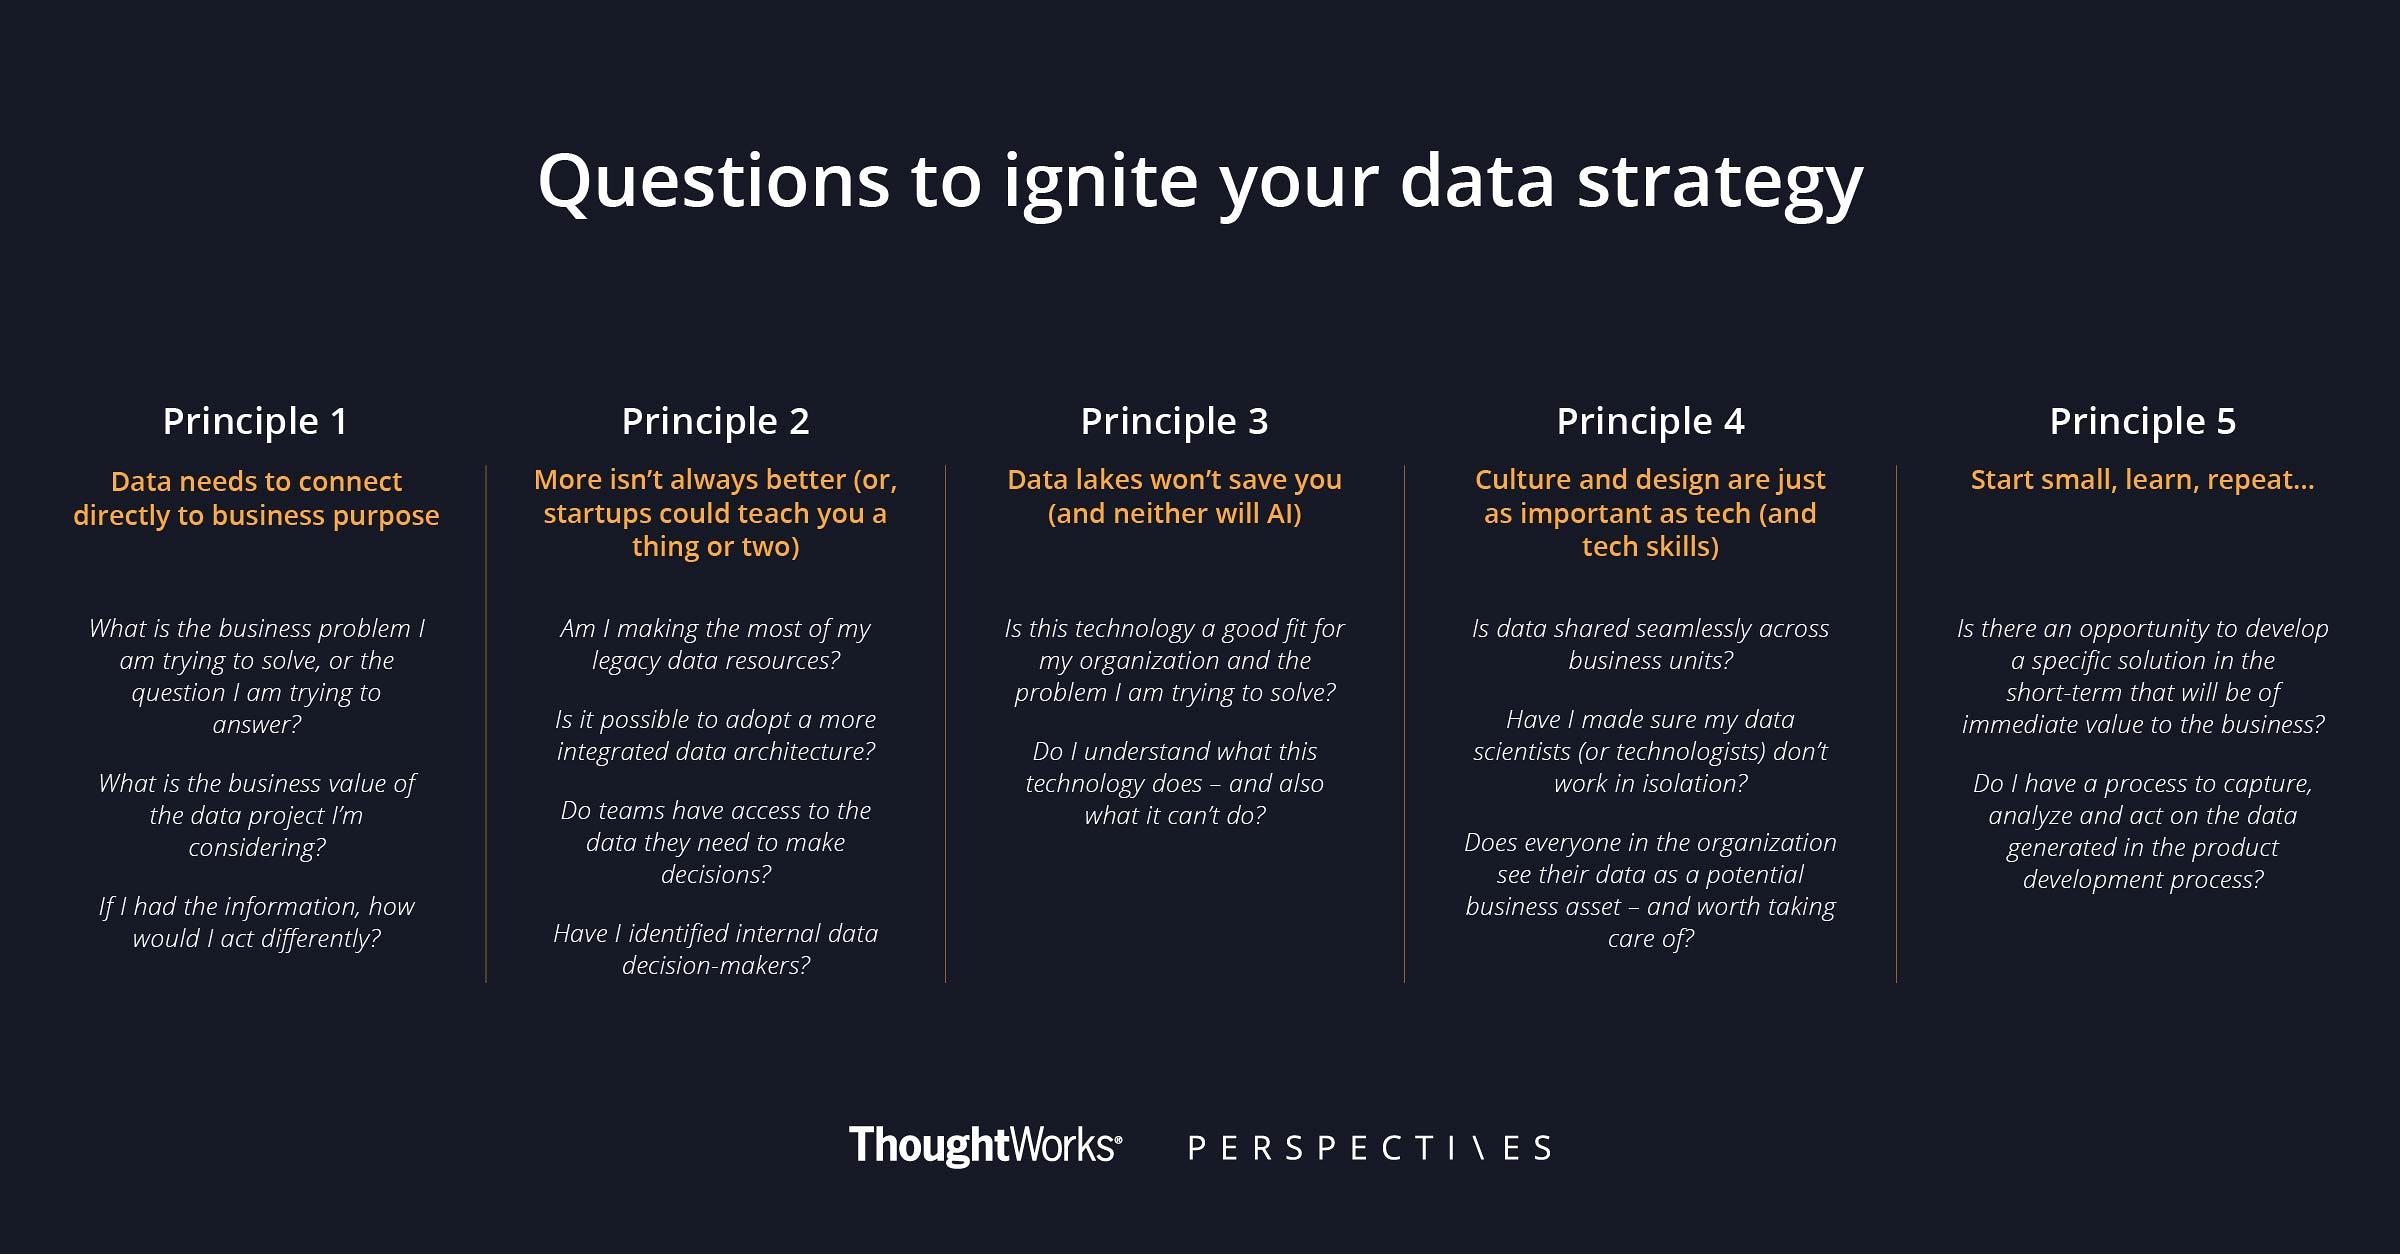 Principle 1: Data needs to connect directly to business purpose | Principle 2: More isn’t always better (or, startups could teach you a thing or two)  |  Principle 3: Data lakes won’t save you (and neither will AI)  |  Principle 4: Culture and design are just as important as tech (and tech skills) | Principle 5: Start small, learn, repeat … 